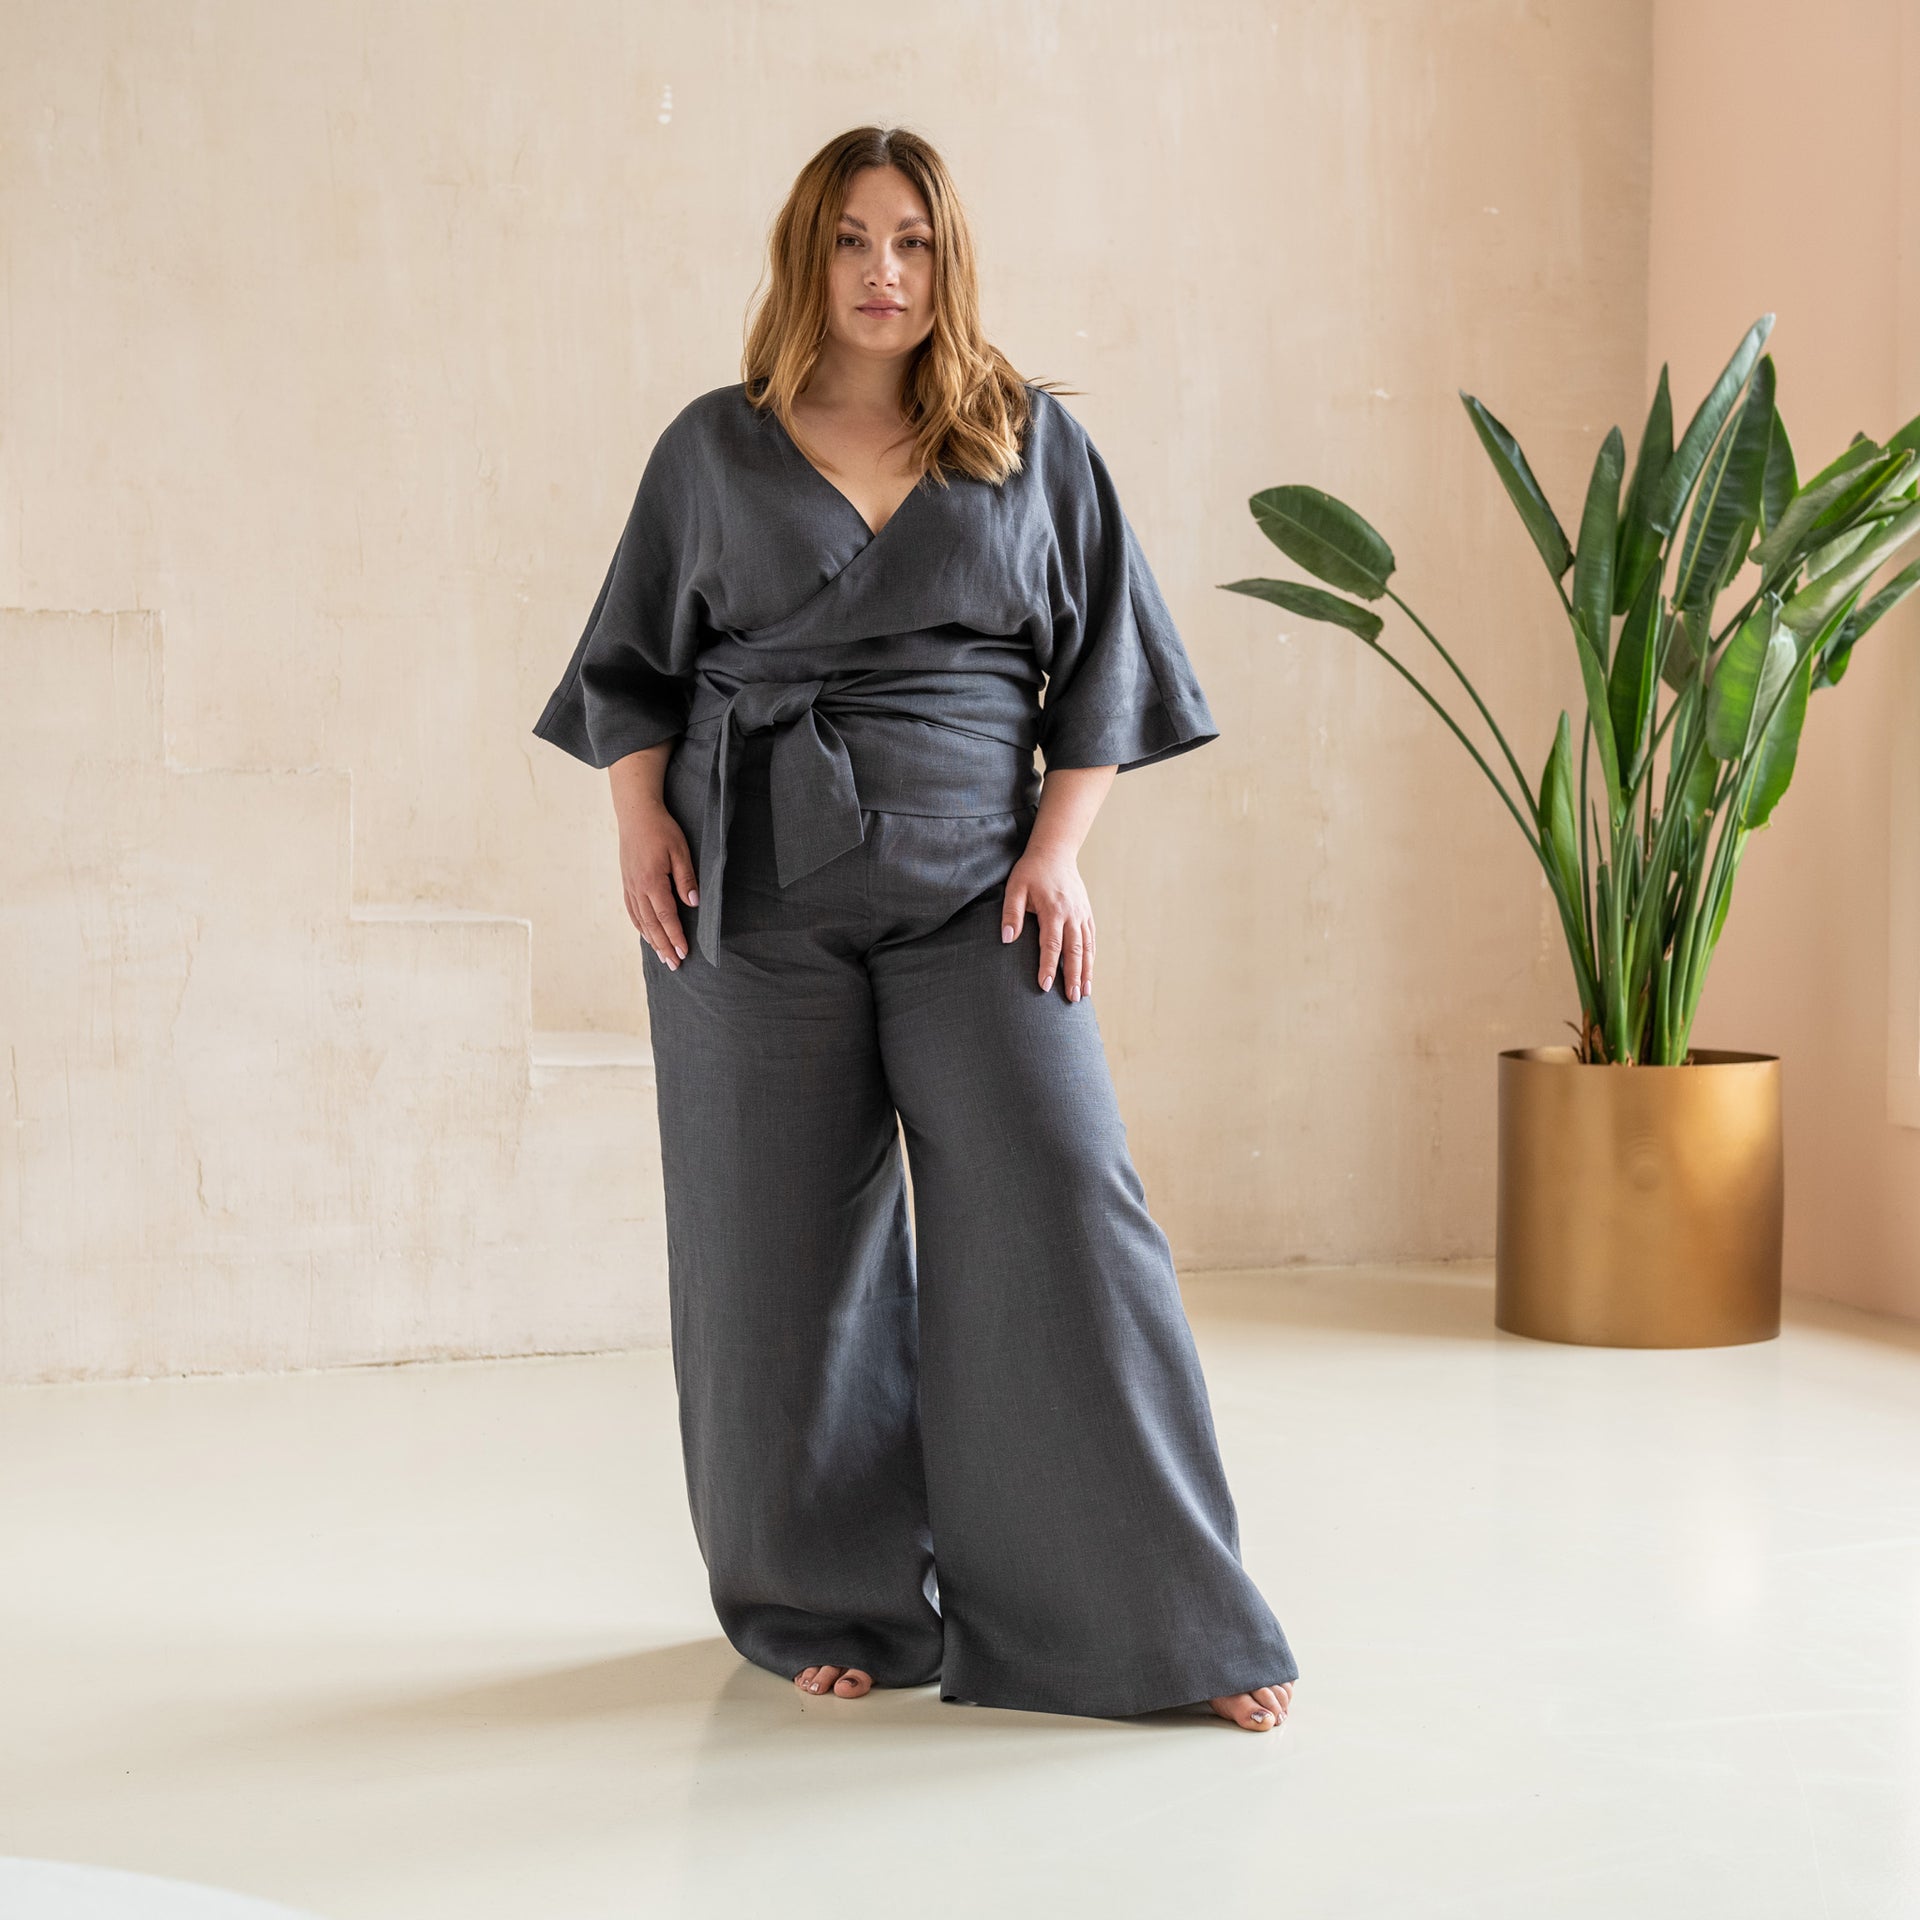 Kimono-Inspired Linen Pants and Blouse – Loose Fit Women Clothing